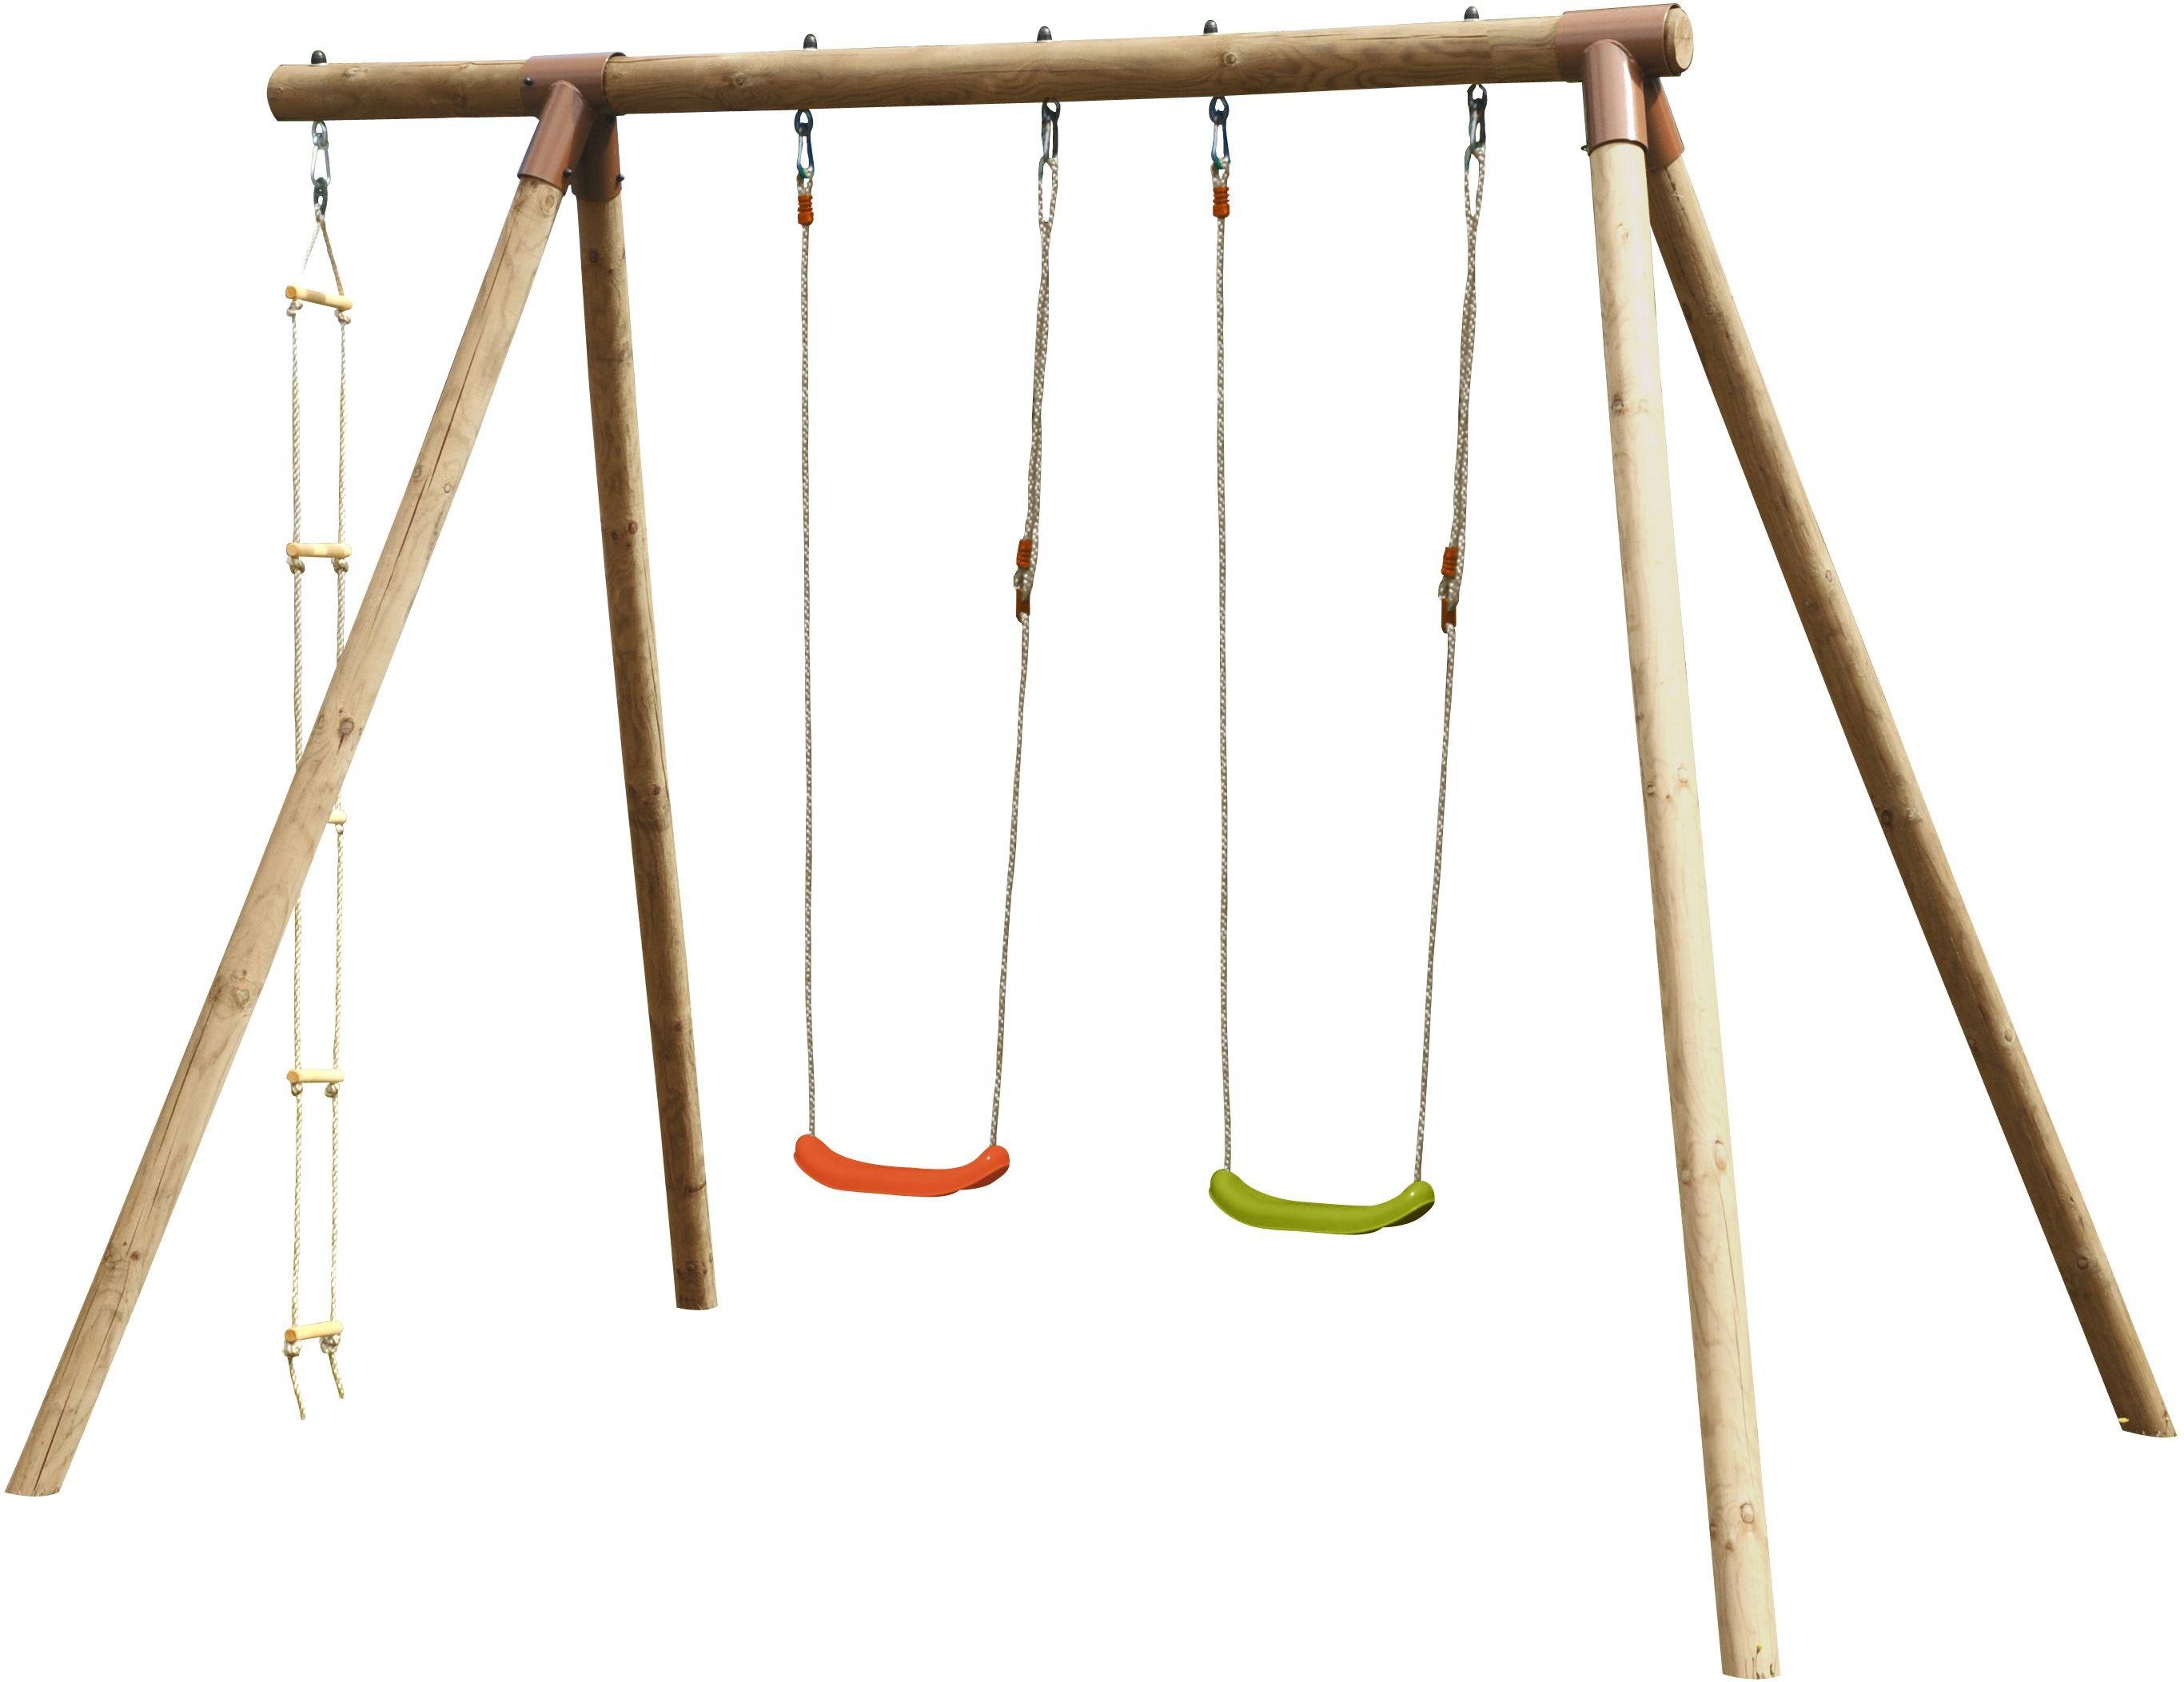 Soulet Merida Double Swing and Climbing Ladder.